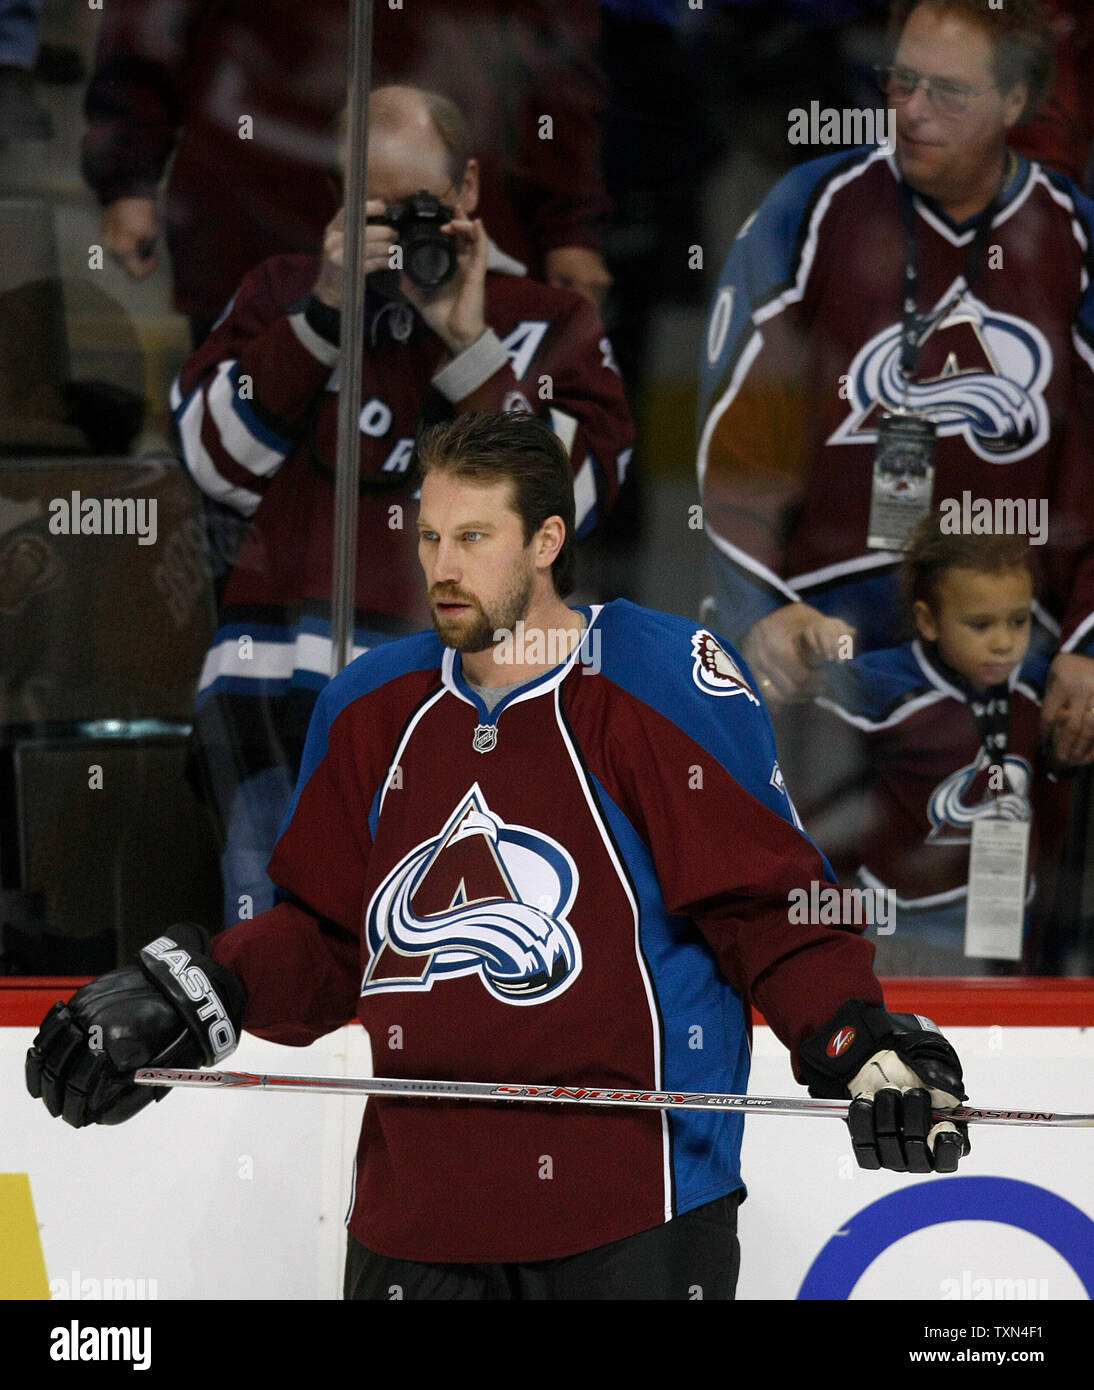 Can A Healthy 37-Year-Old Peter Forsberg Help The Colorado Avalanche? 